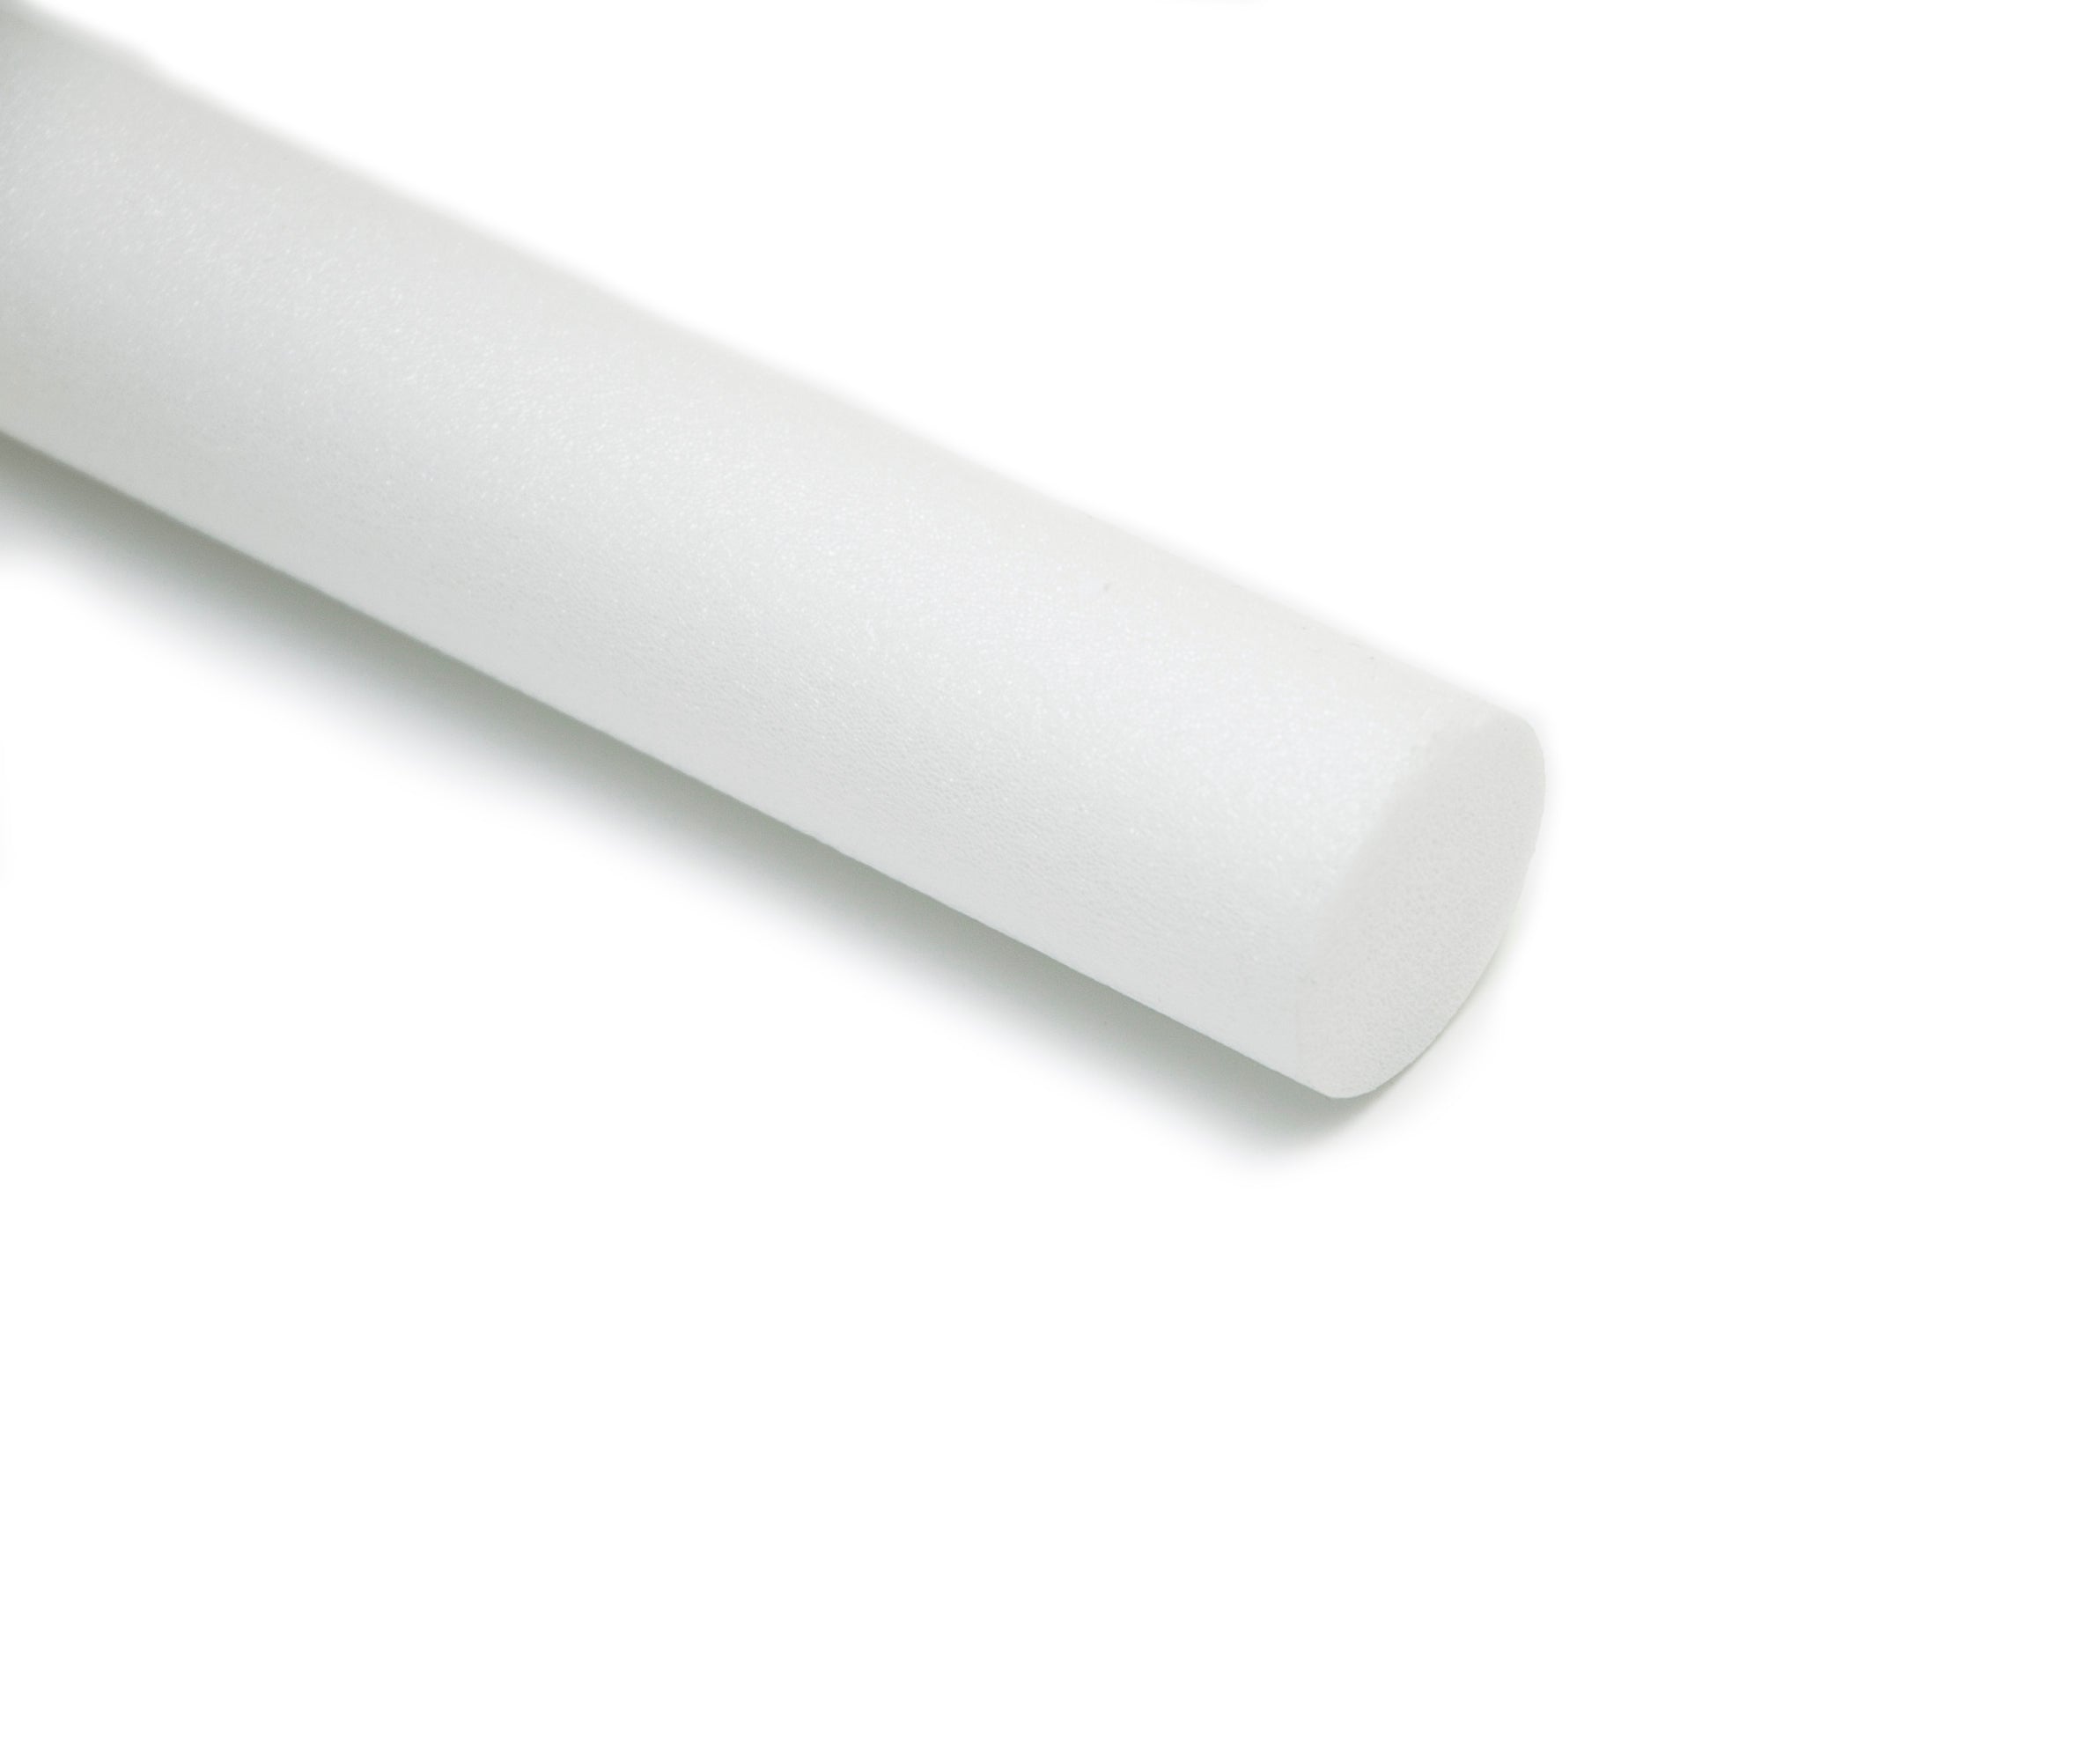 White EPS Hard Foam Rod/Cylinder Craft 1 in Diameter by MT Products (15 Pieces), Size: 10